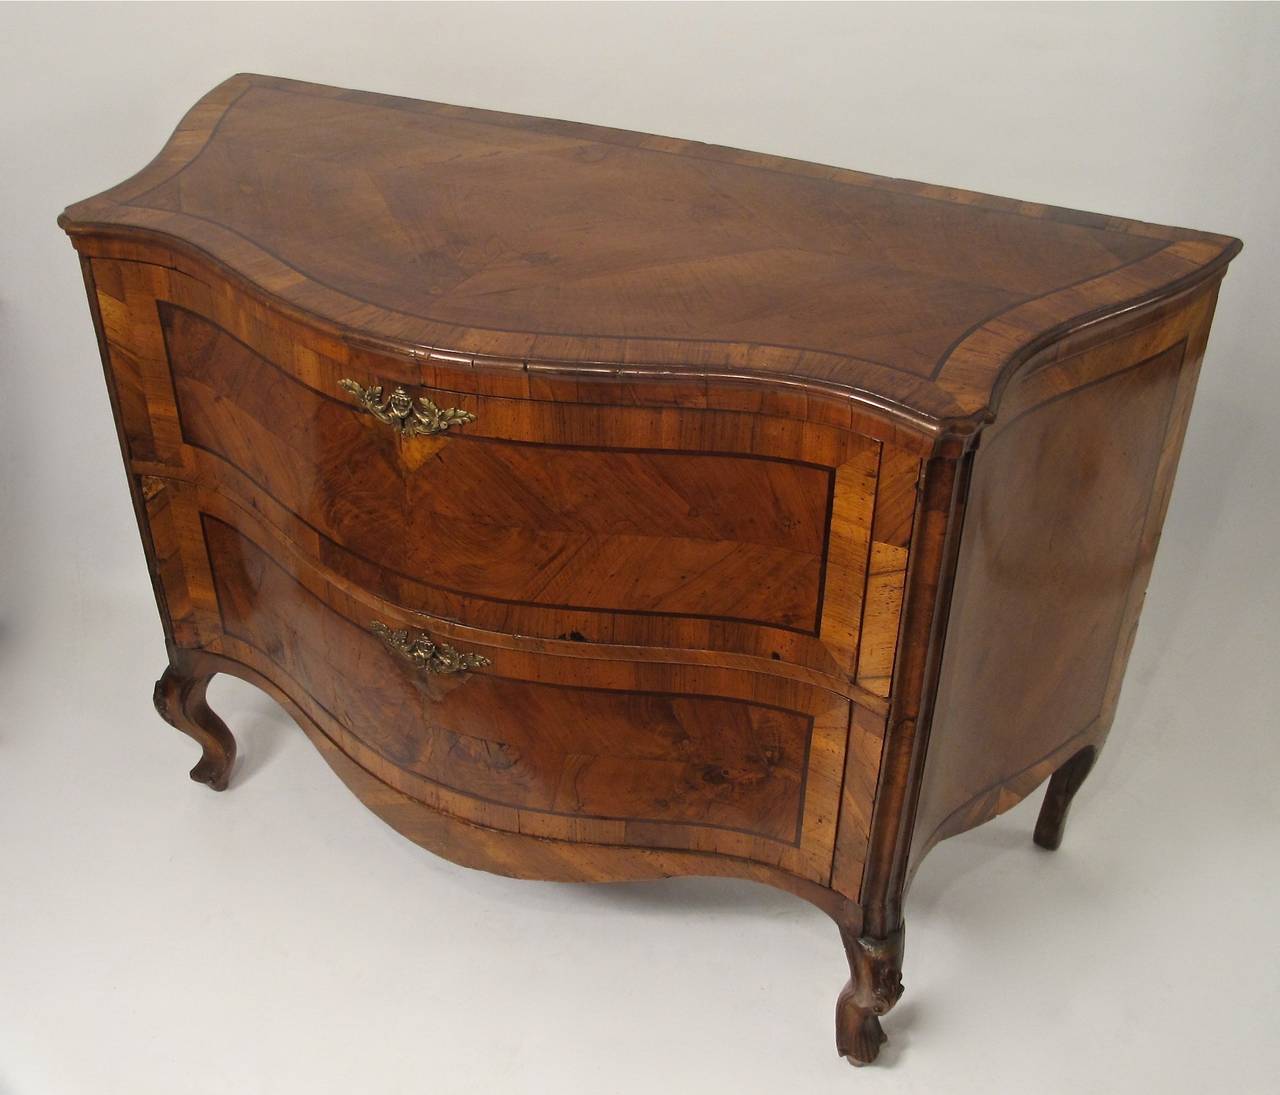 Exceptional two-drawer walnut commode or chest of drawers with walnut and walnut inlay on carved cabriole legs, Italy, mid-18th century.